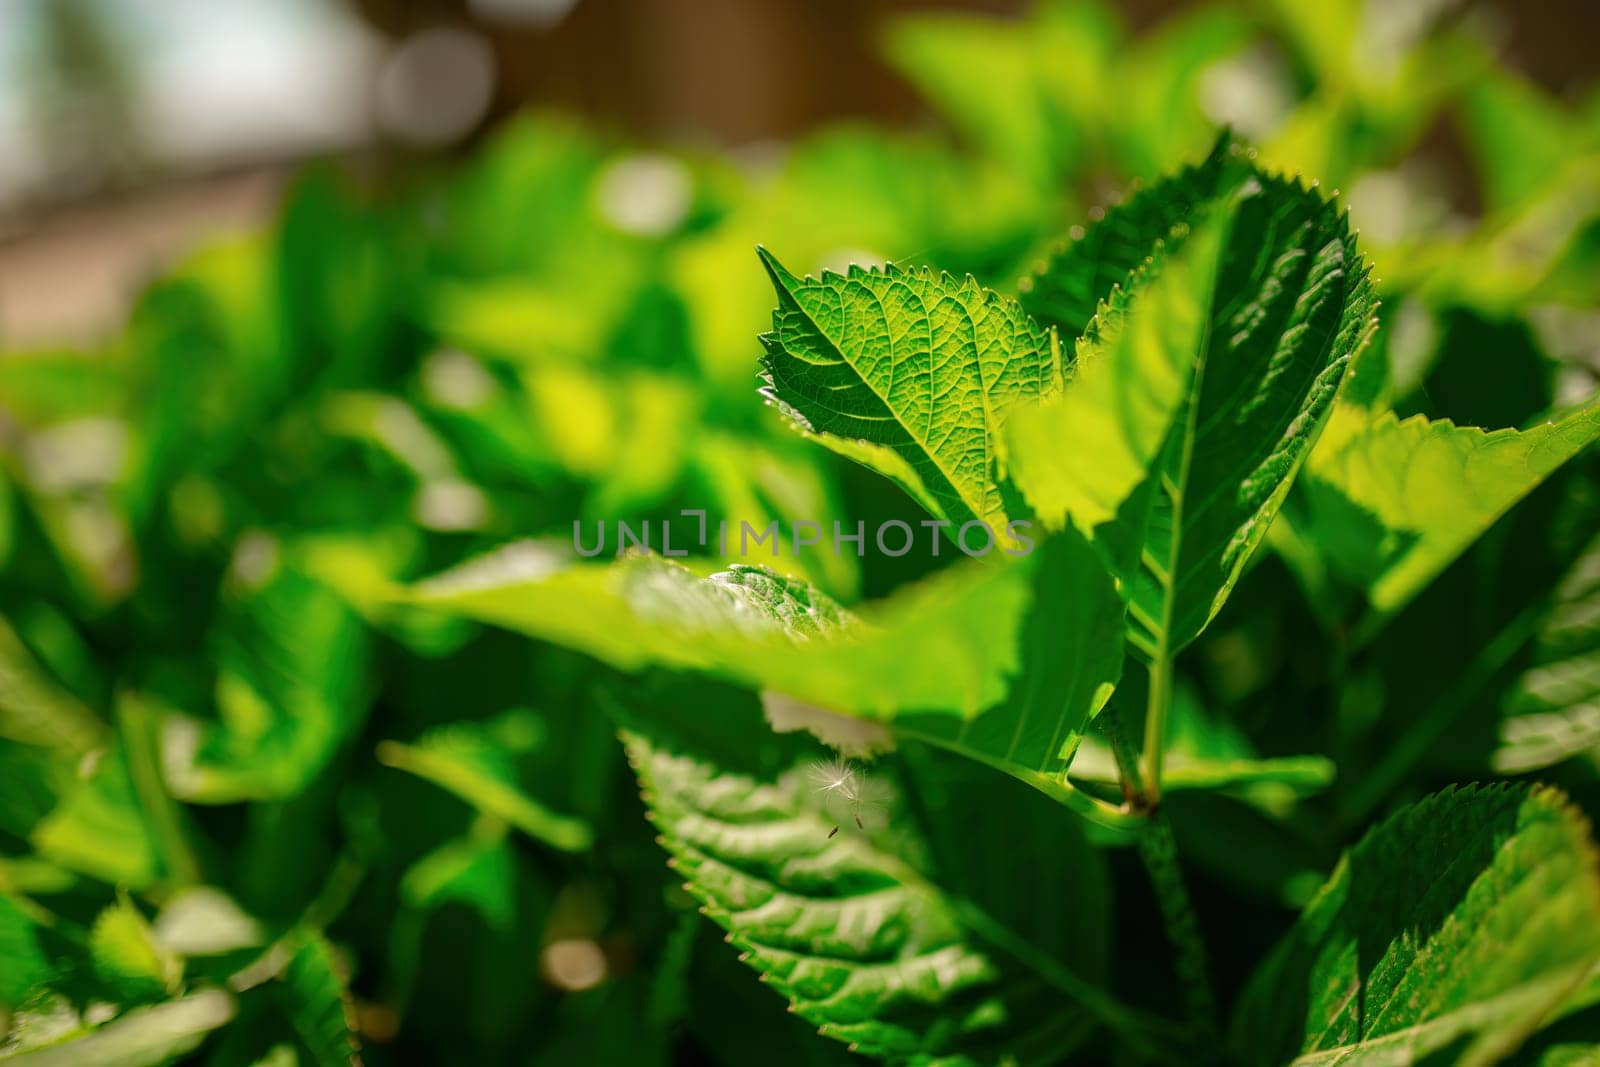 A detailed view of the intricate green leaves of a healthy plant, showcasing its texture and vibrant color.